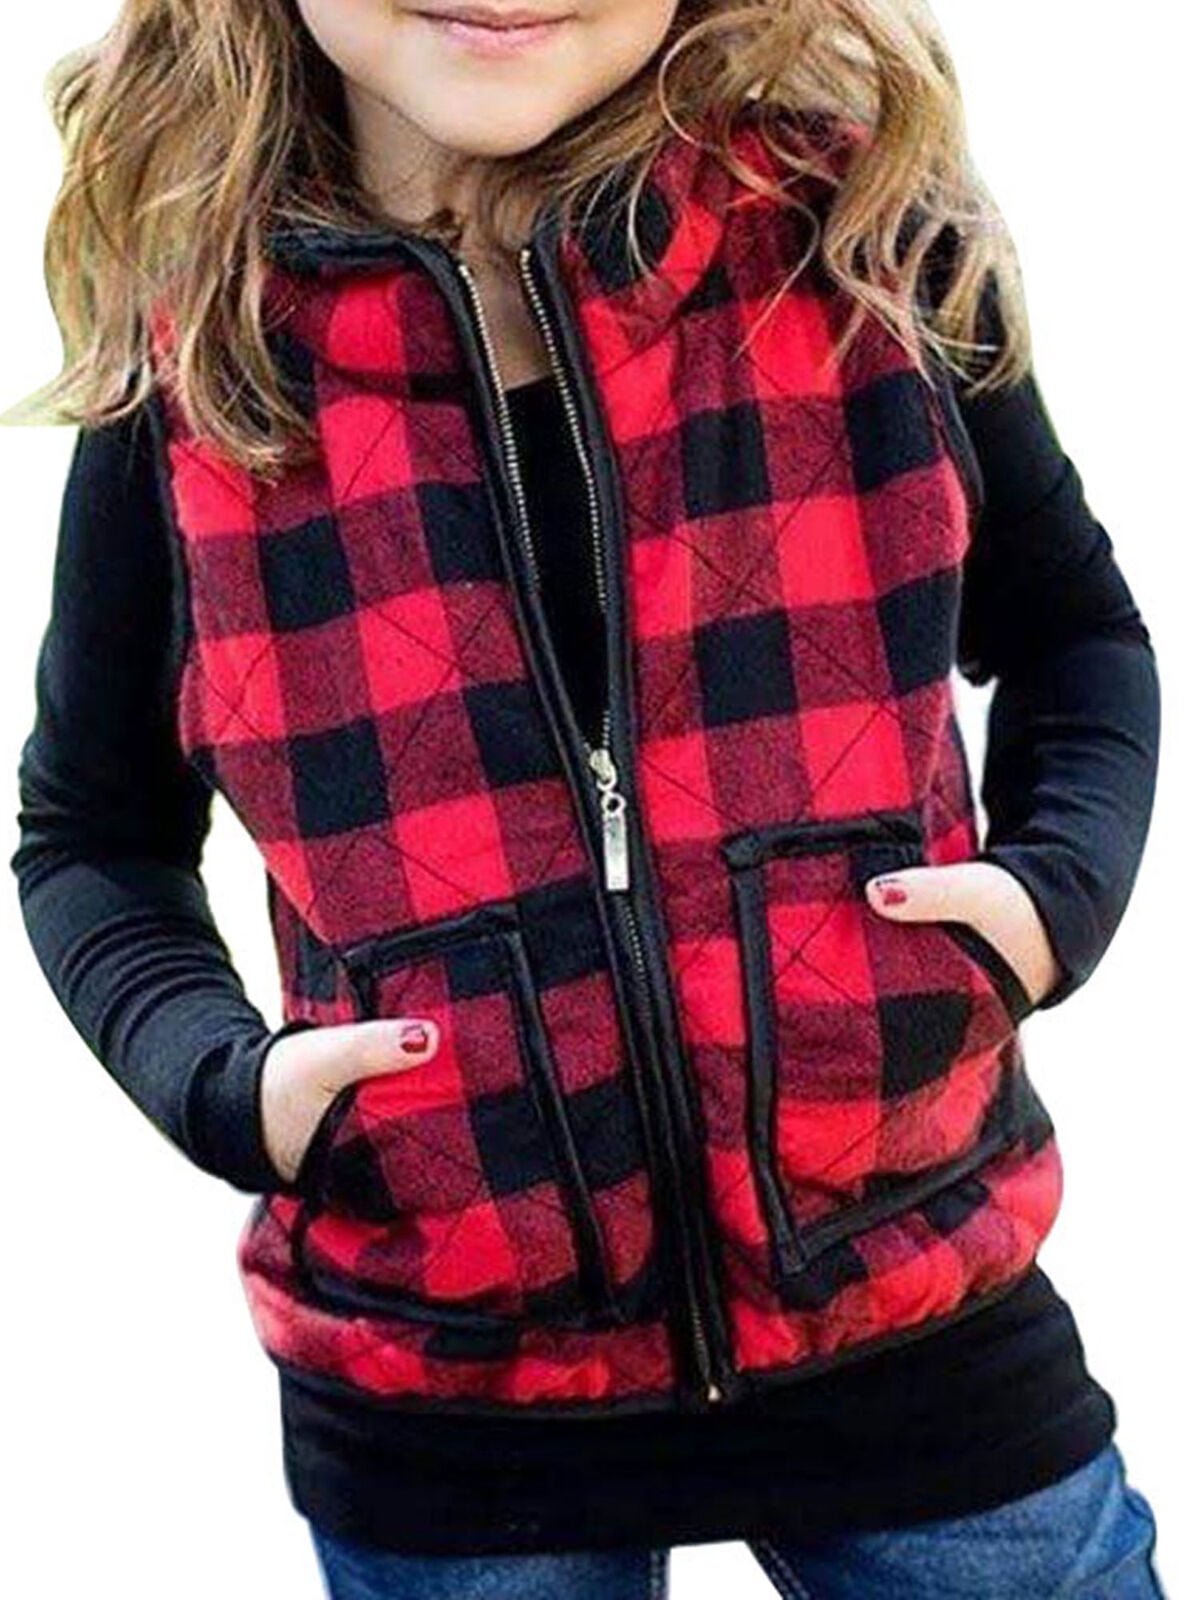 Blcak Plaid Vests, 4-5T Toddler Baby Girls Winter Warm Vest Clothes Buffalo Plaid Jacket Kids Puffer Quilted Gilet Coat